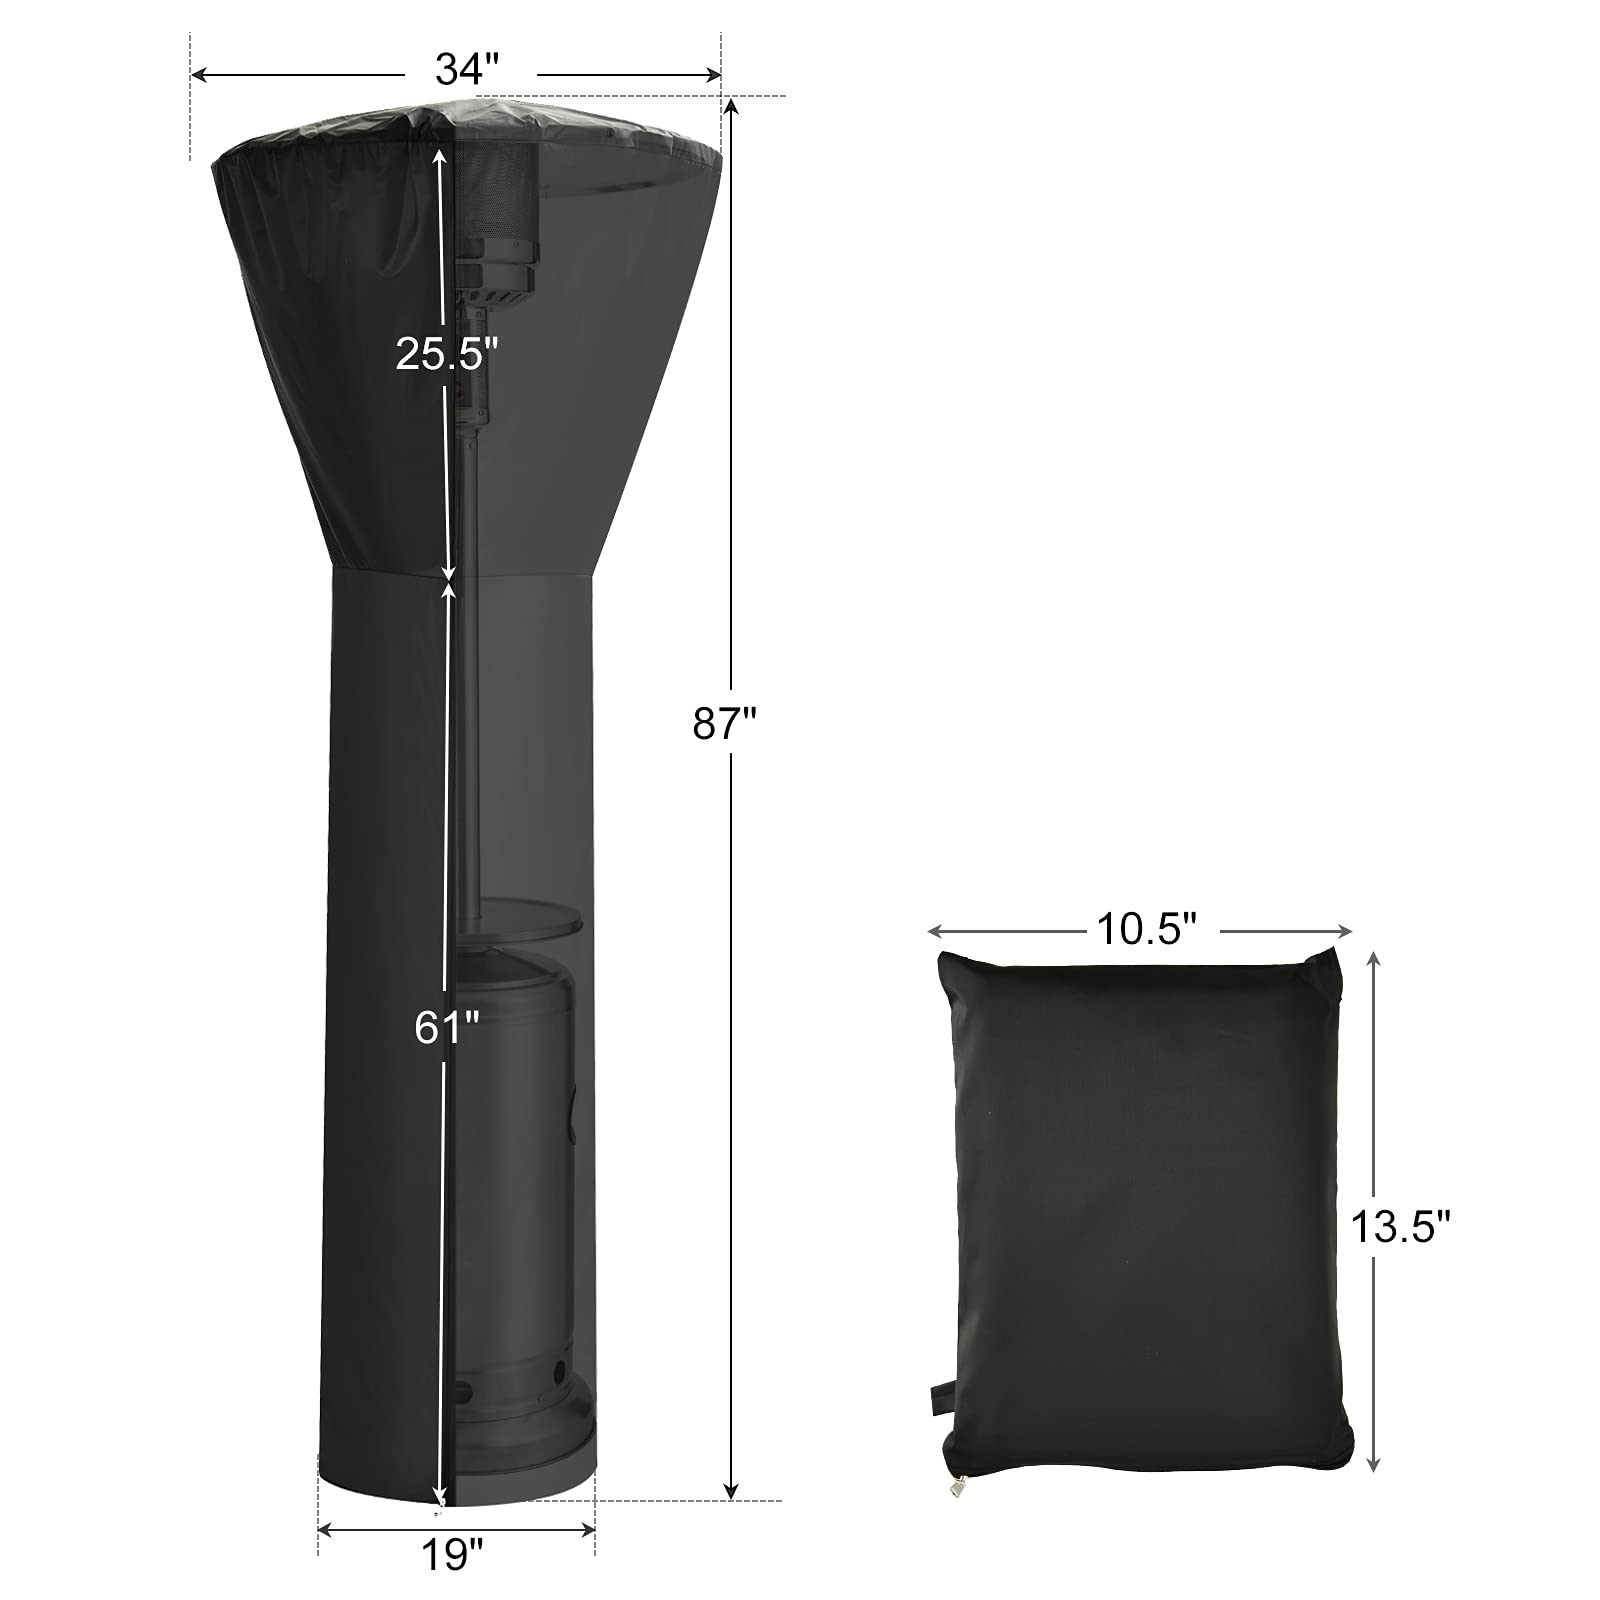 Giantex Patio Heater Cover, Standup Outdoor Round Waterpoof Heater Coverr w/Smooth Zipper & Storage Bag for Outdoor Use